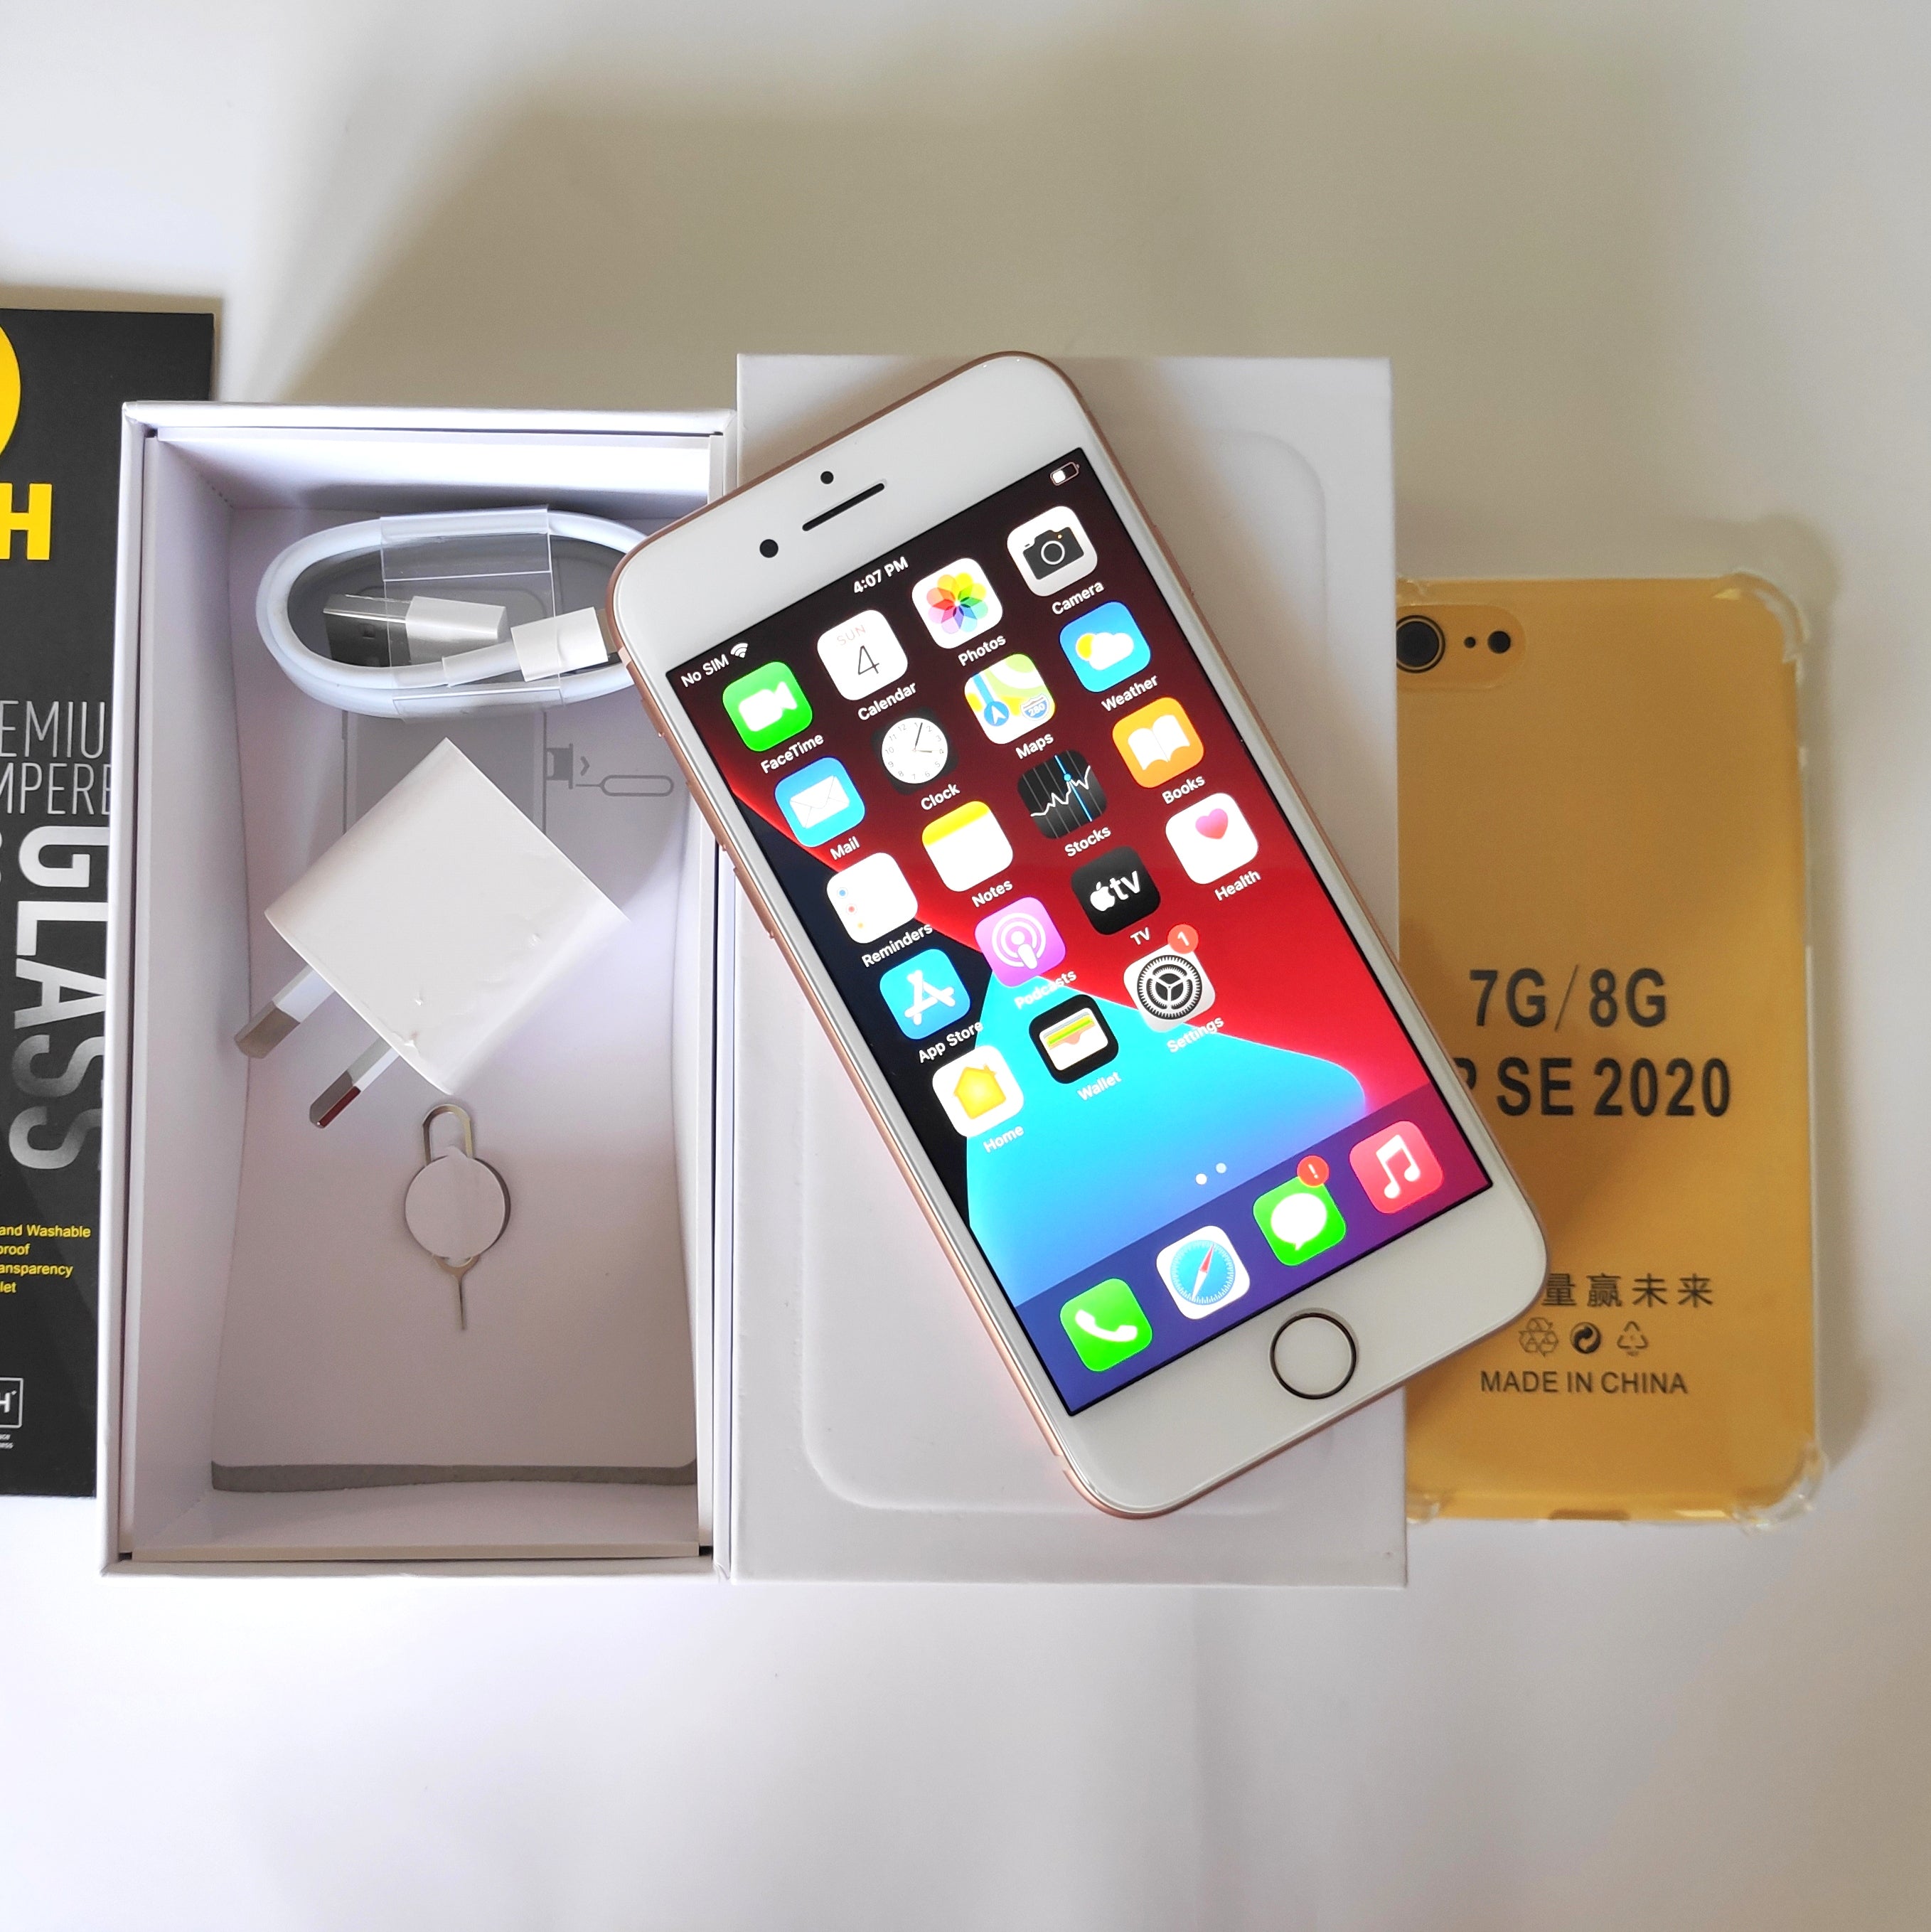 Apple iPhone 8 256GB Gold W New Battery, Case, Screen Protector & Shipping (As New)